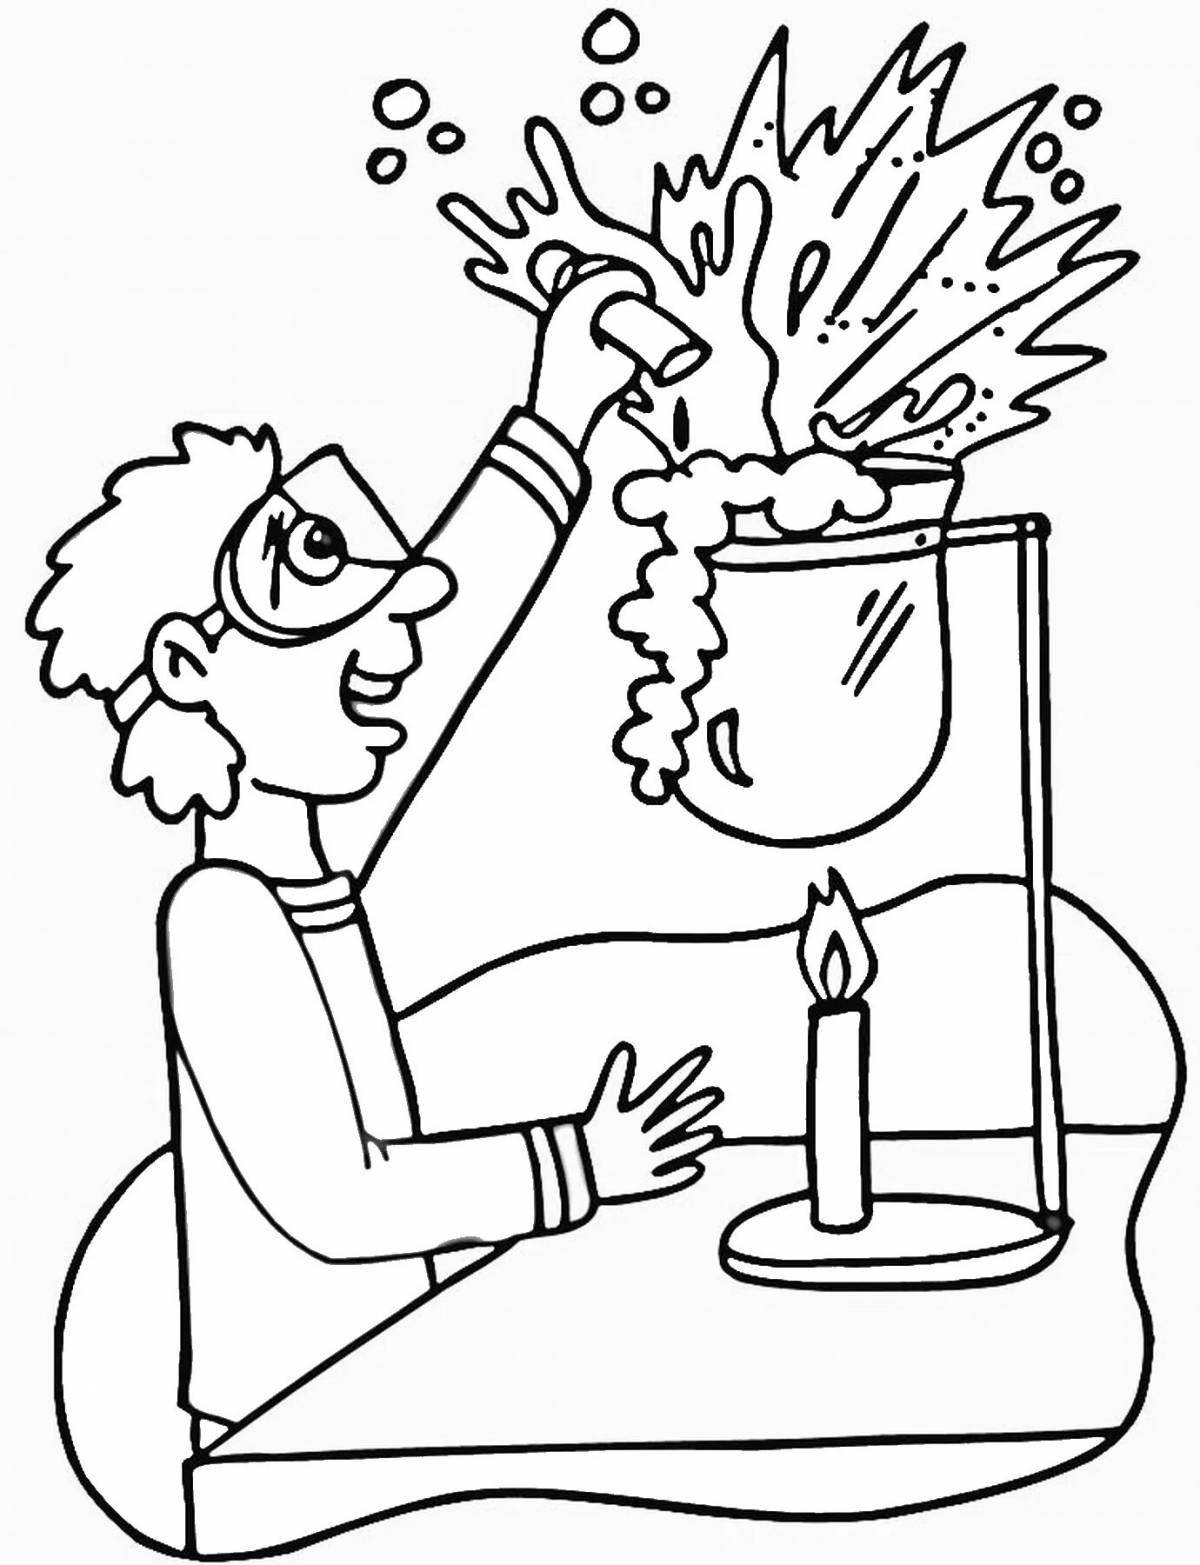 Color-frenzy coloring page chemist